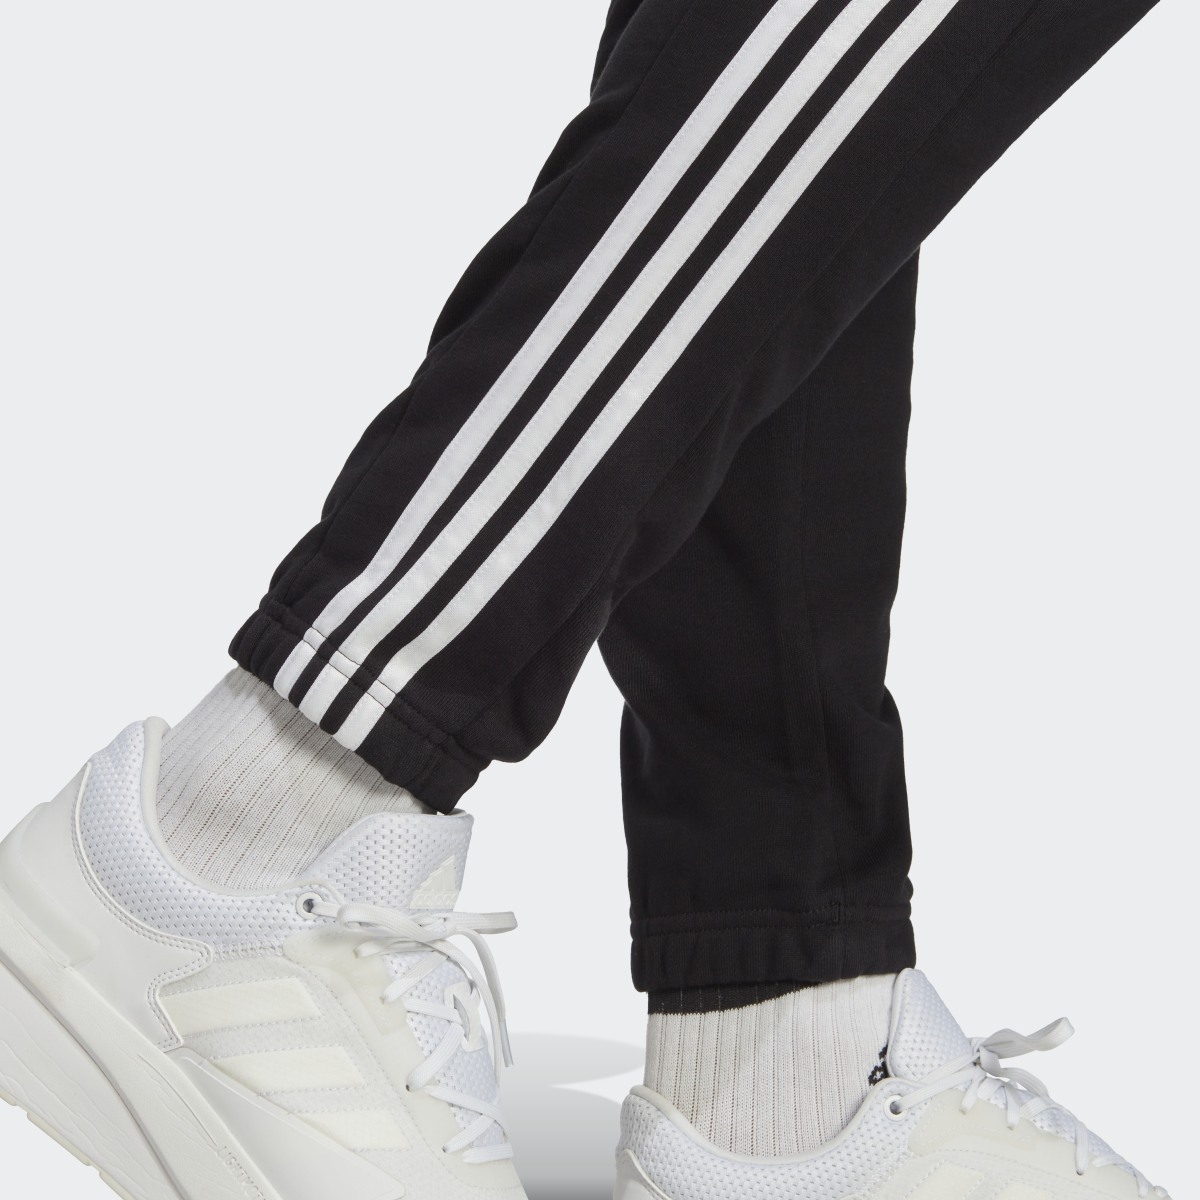 Adidas Essentials French Terry Tapered Elastic Cuff 3-Stripes Pants. 6